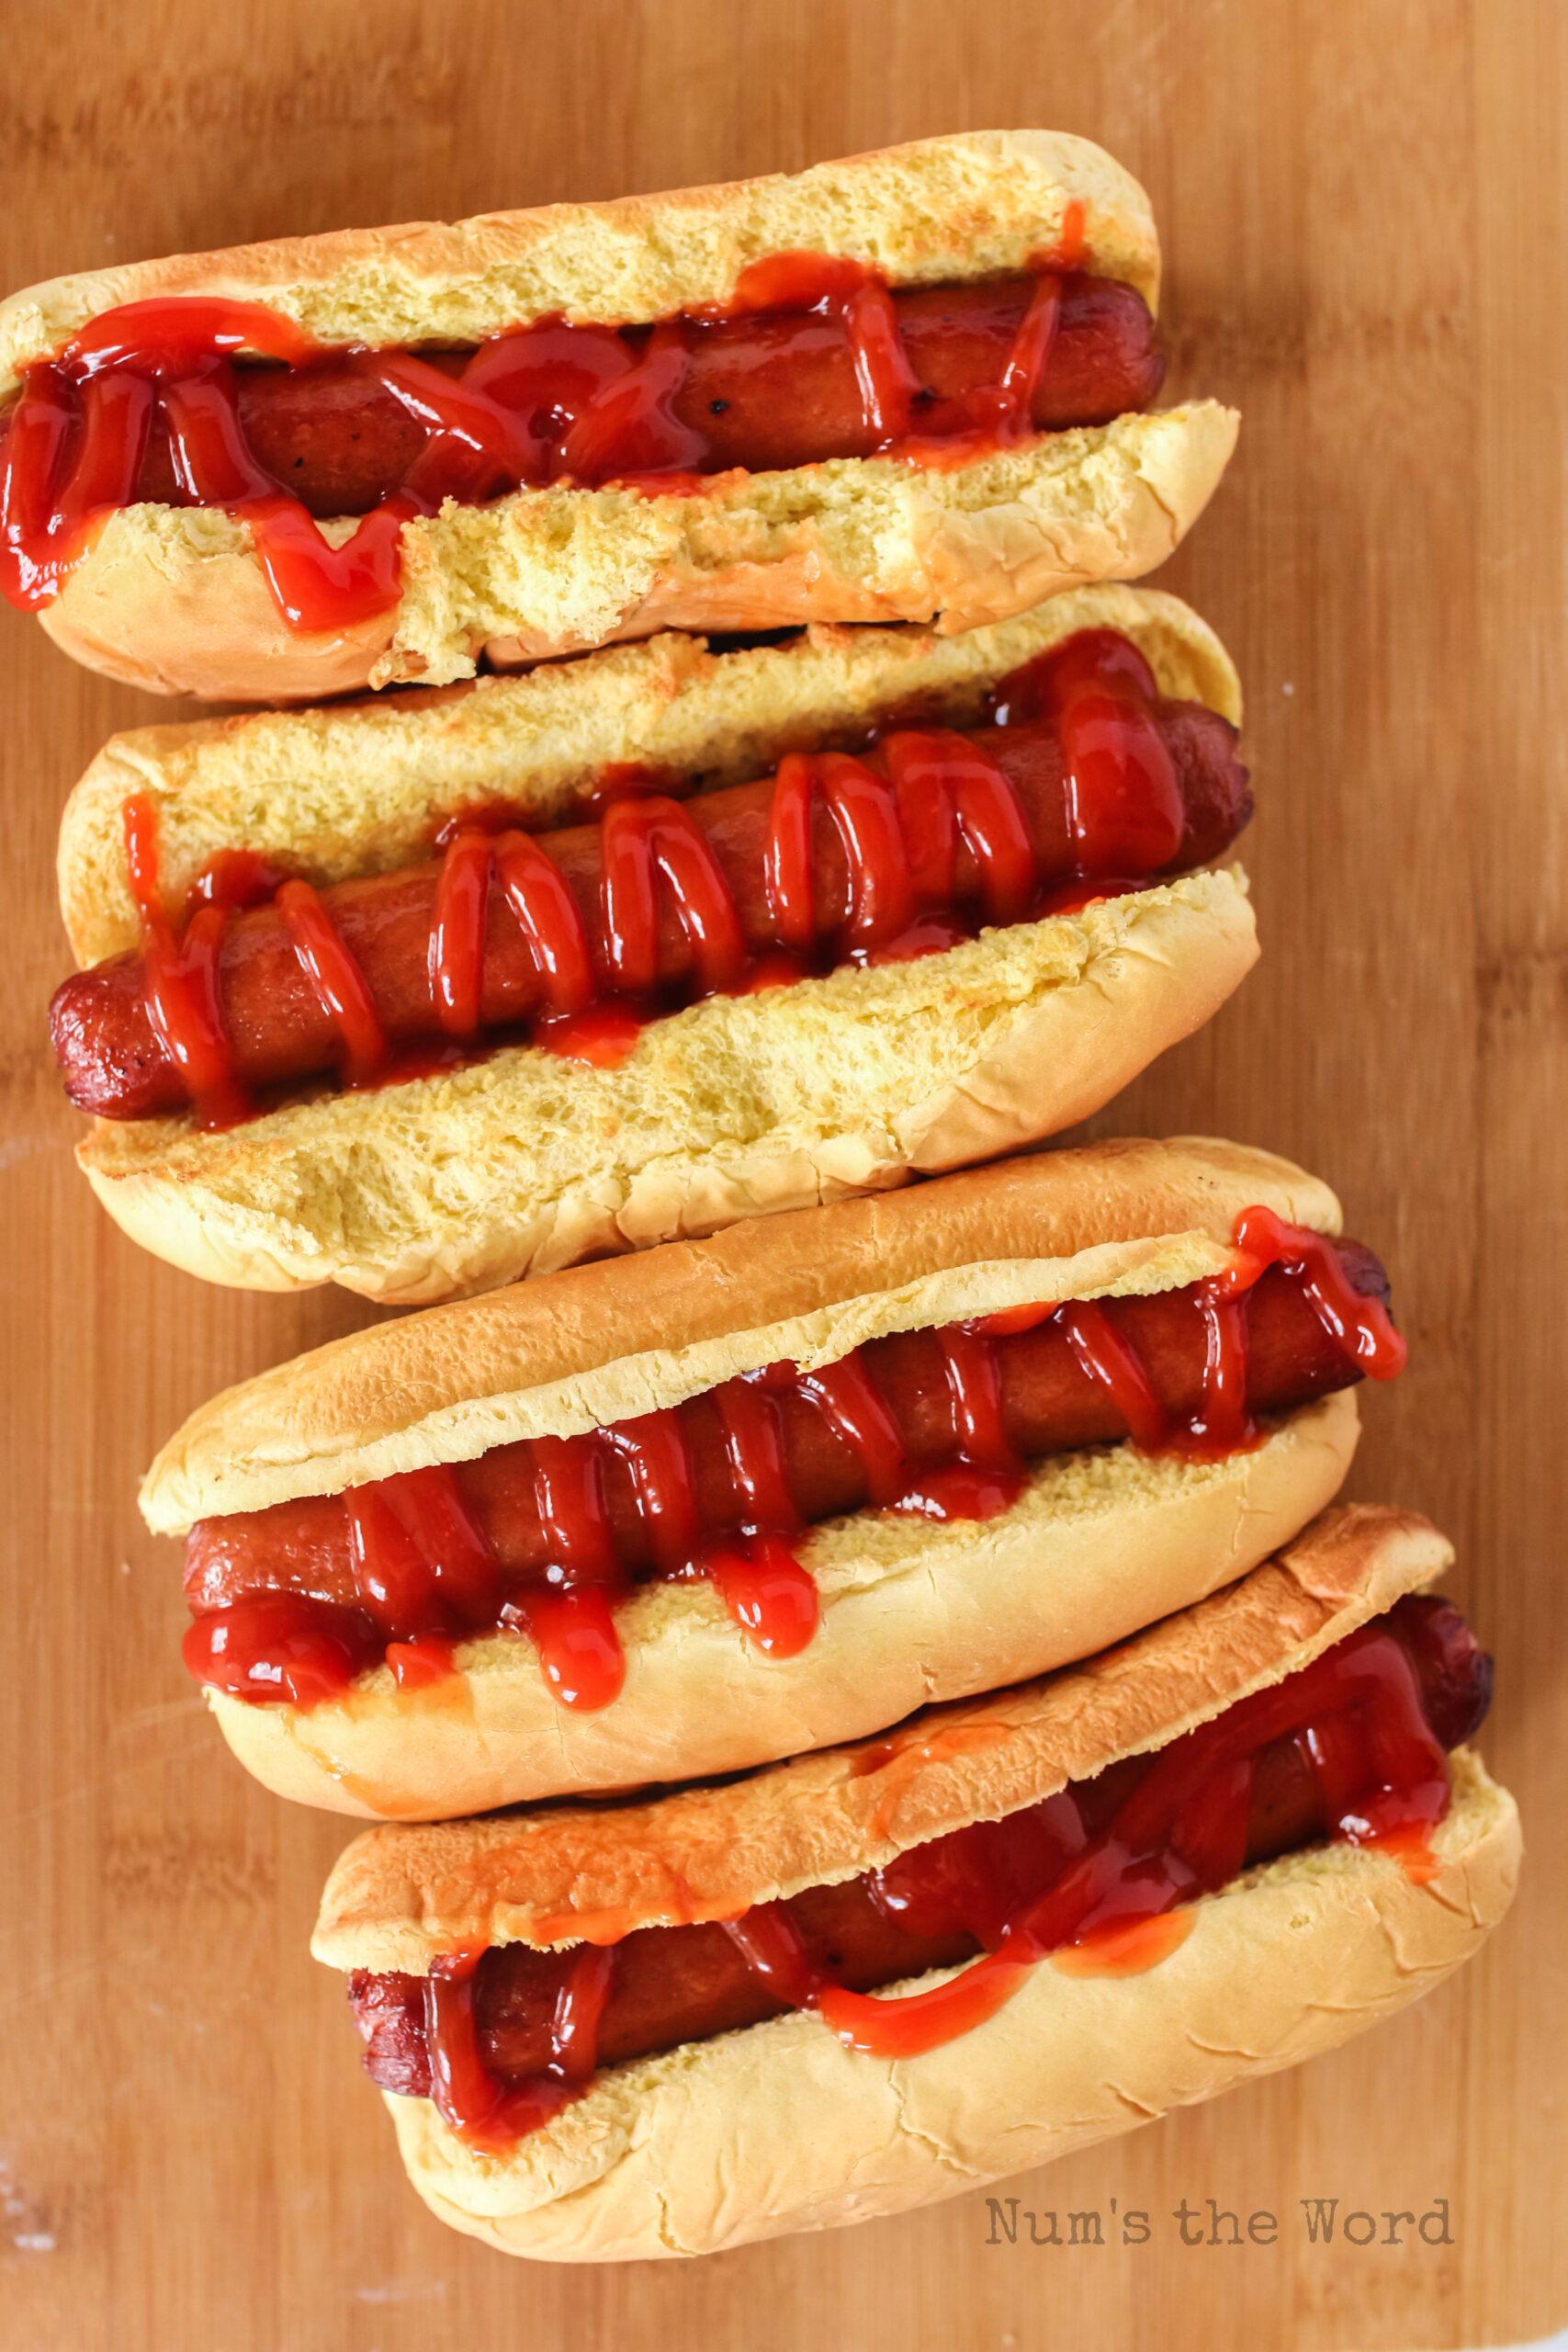 hot dogs with ketchup, ready to eat